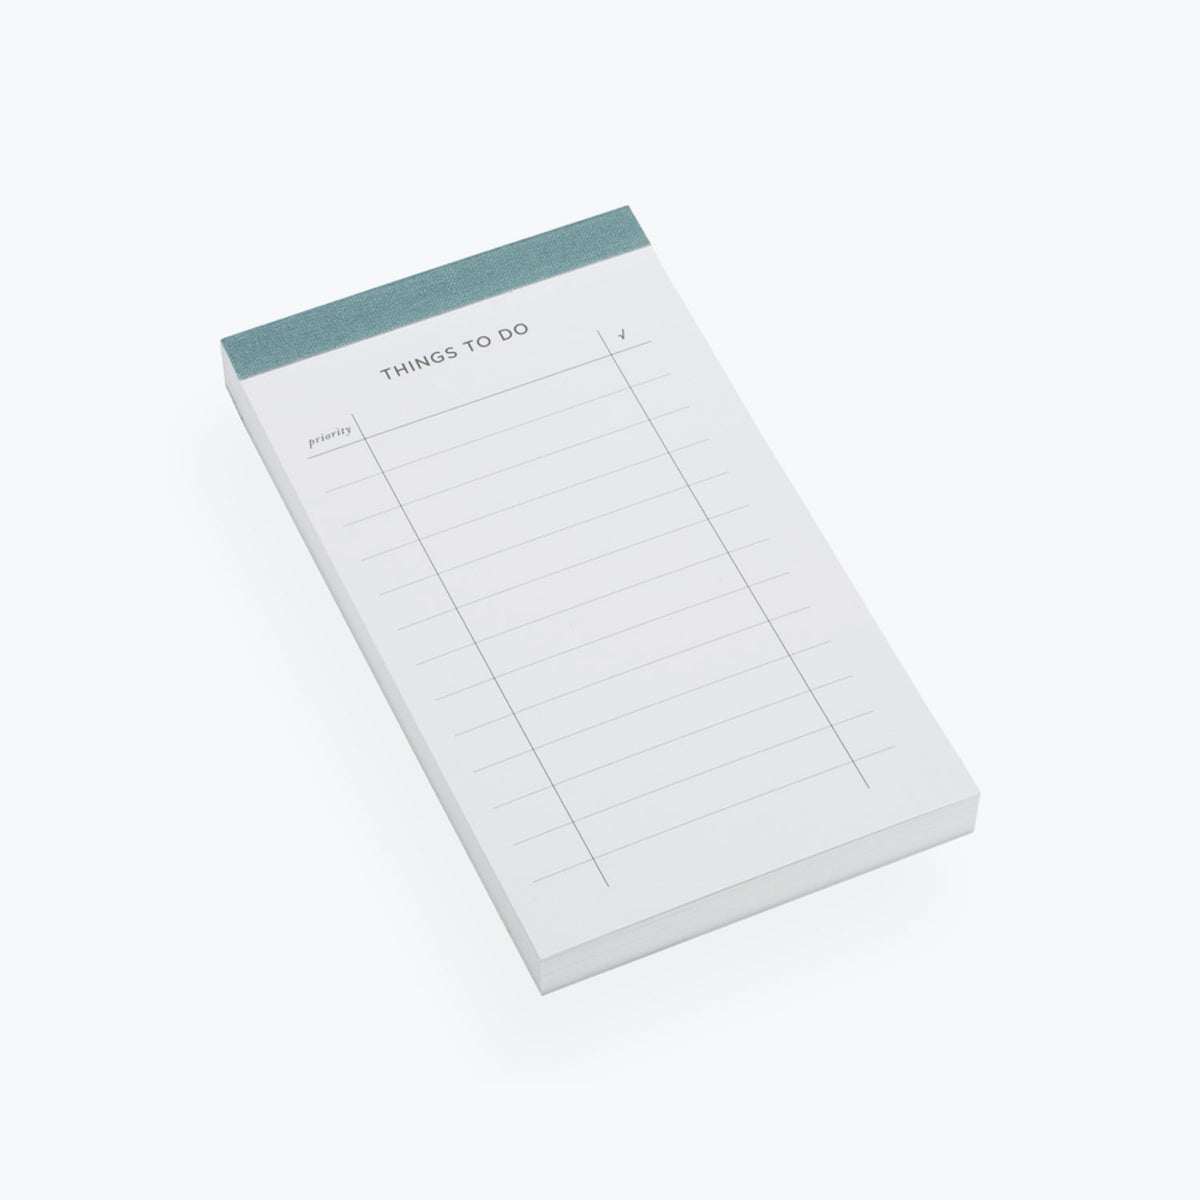 Bookbinders Design - Planner - To Do List - Dusty Green